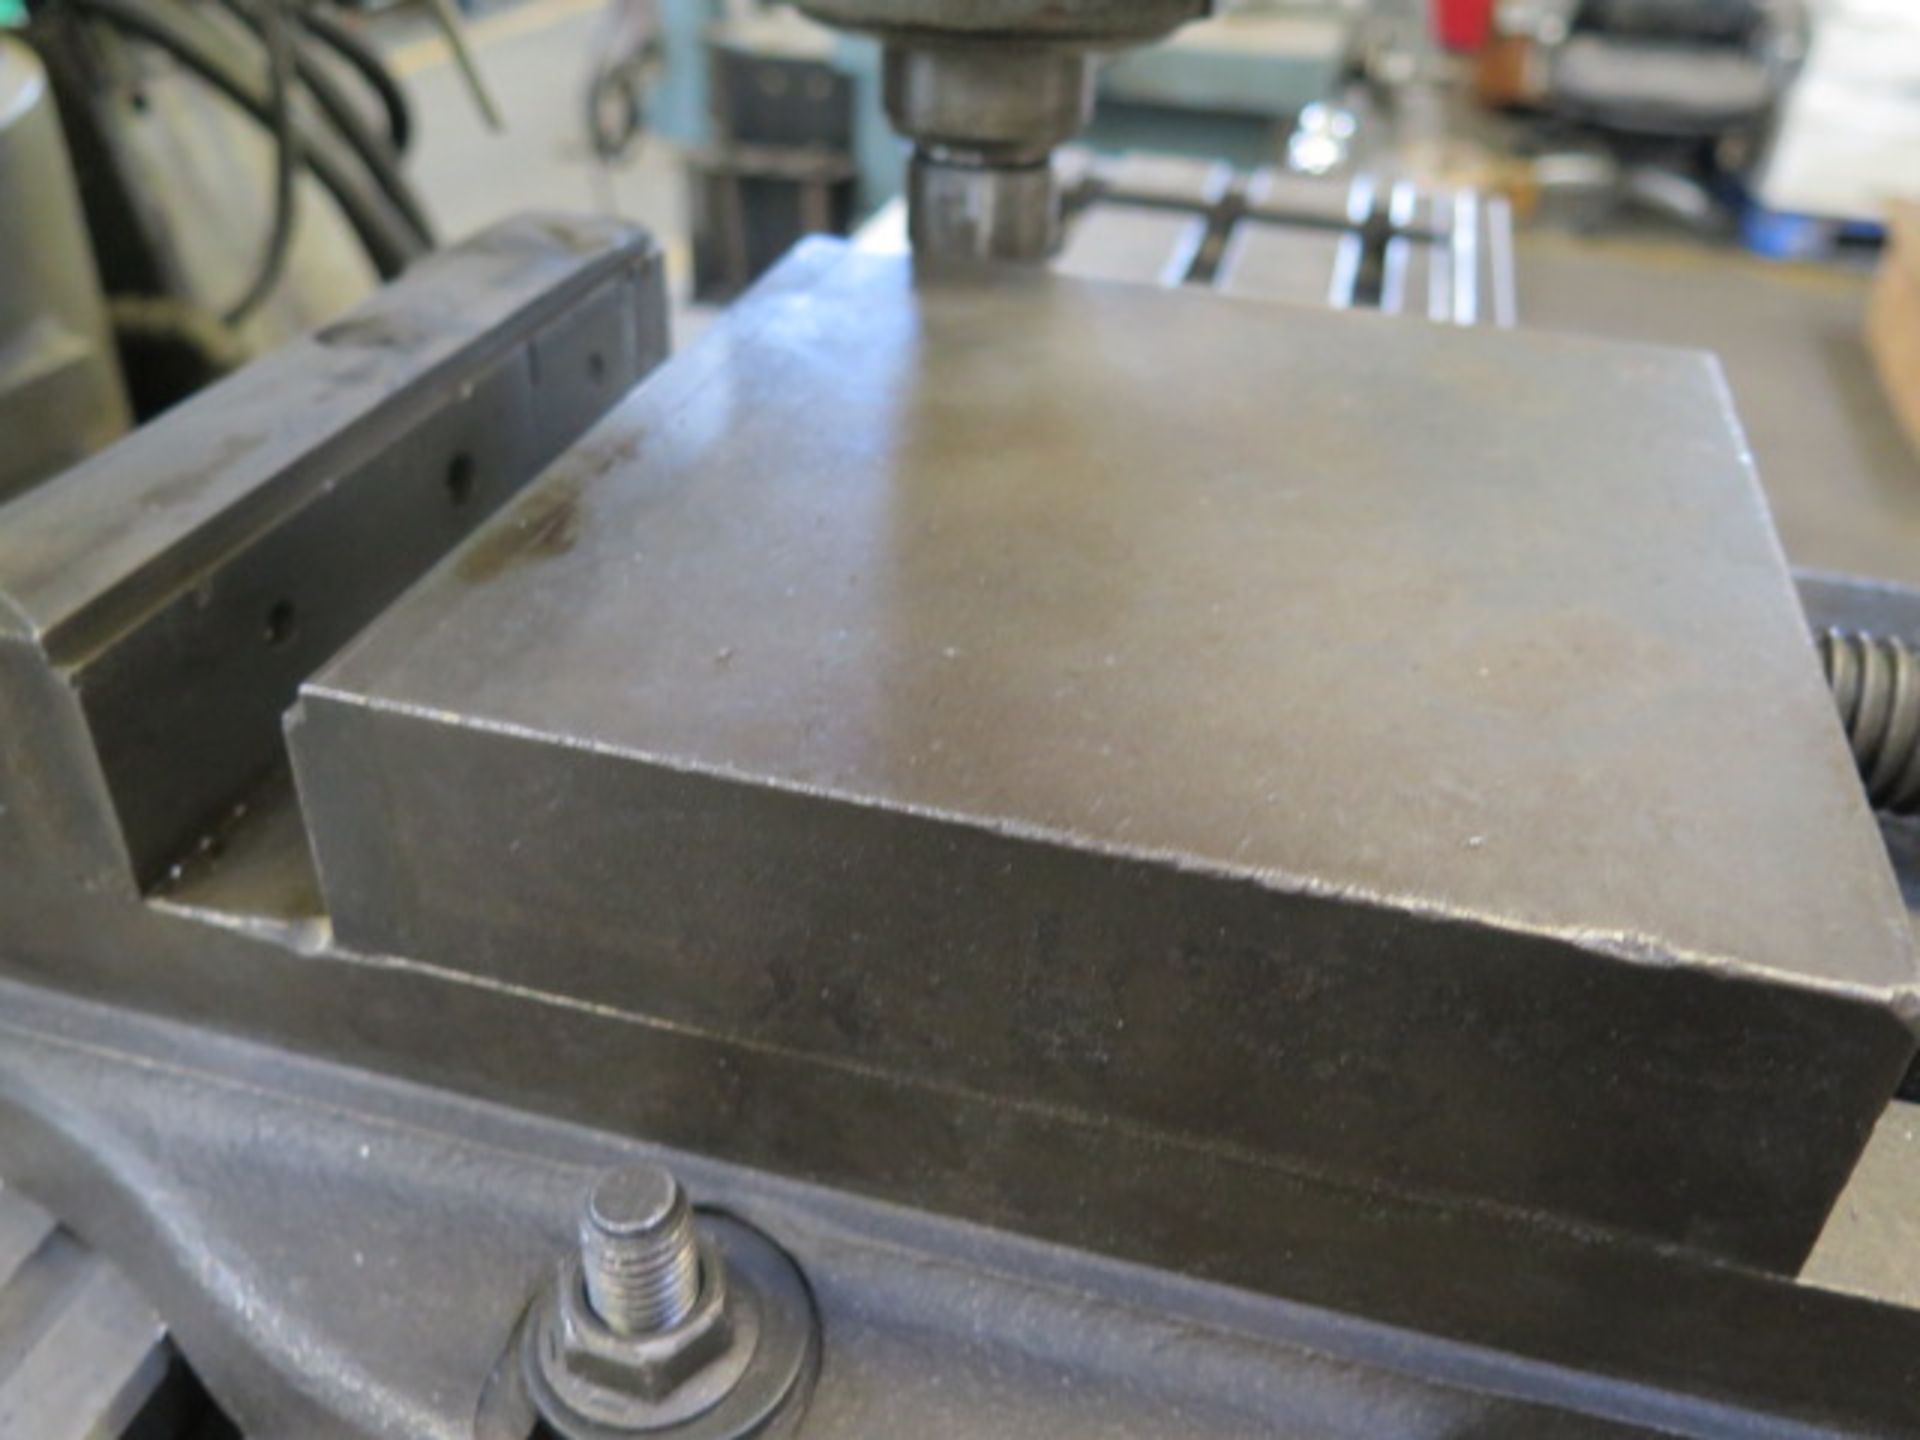 7" Machine Vise (SOLD AS-IS - NO WARRANTY) - Image 3 of 4